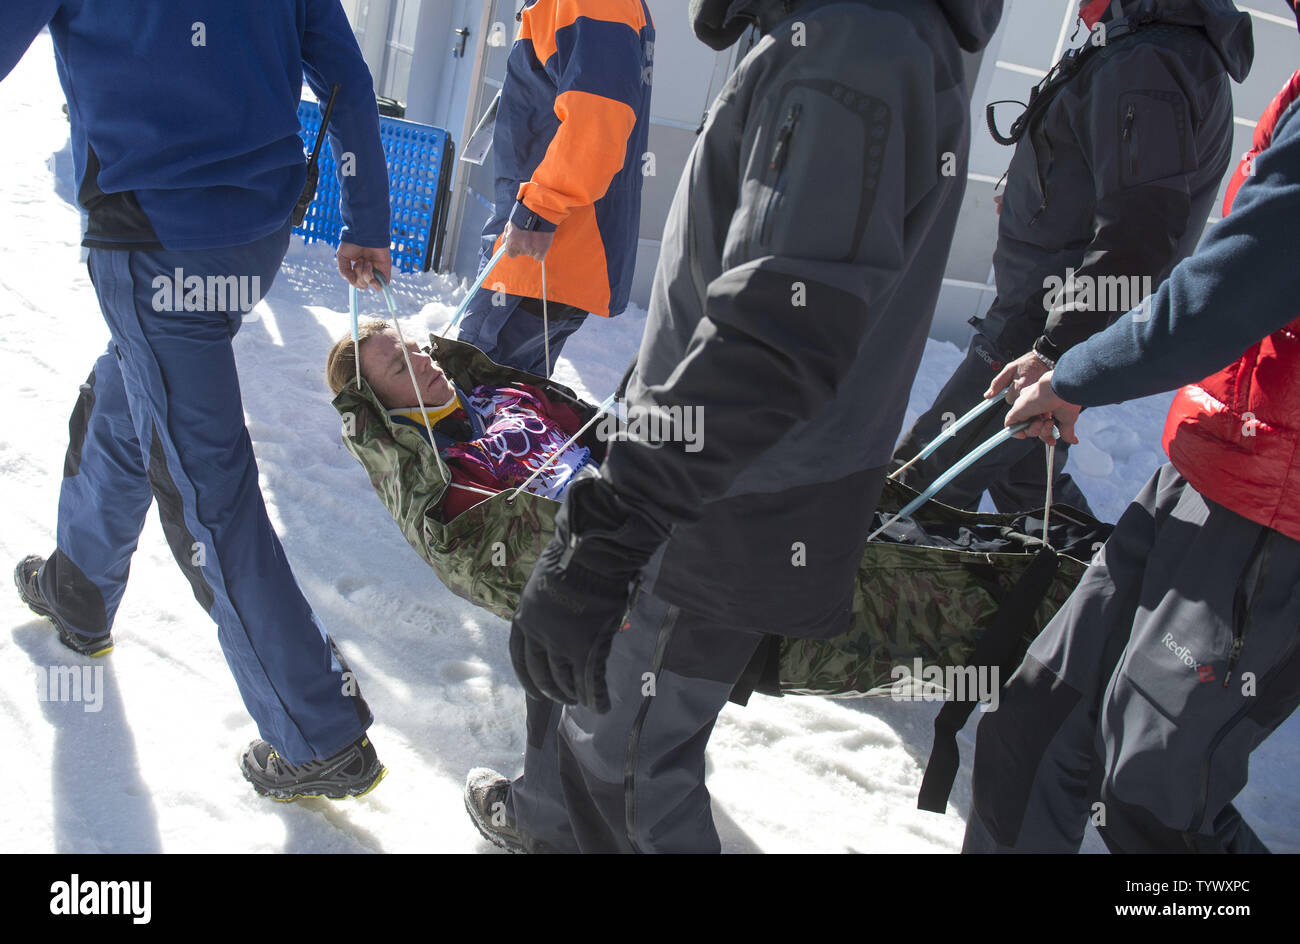 Norwegian snowboarder Torstein Horgmo, a medal contender in slopestyle, is carried off the course by medical staff after breaking his collarbone on a training run at the Rosa Khutor Extreme Park prior to the start of the Sochi 2014 Winter Olympics on February 3, 2014 in Kransnaya Polyana, Russia. UPI/Kevin Dietsch Stock Photo